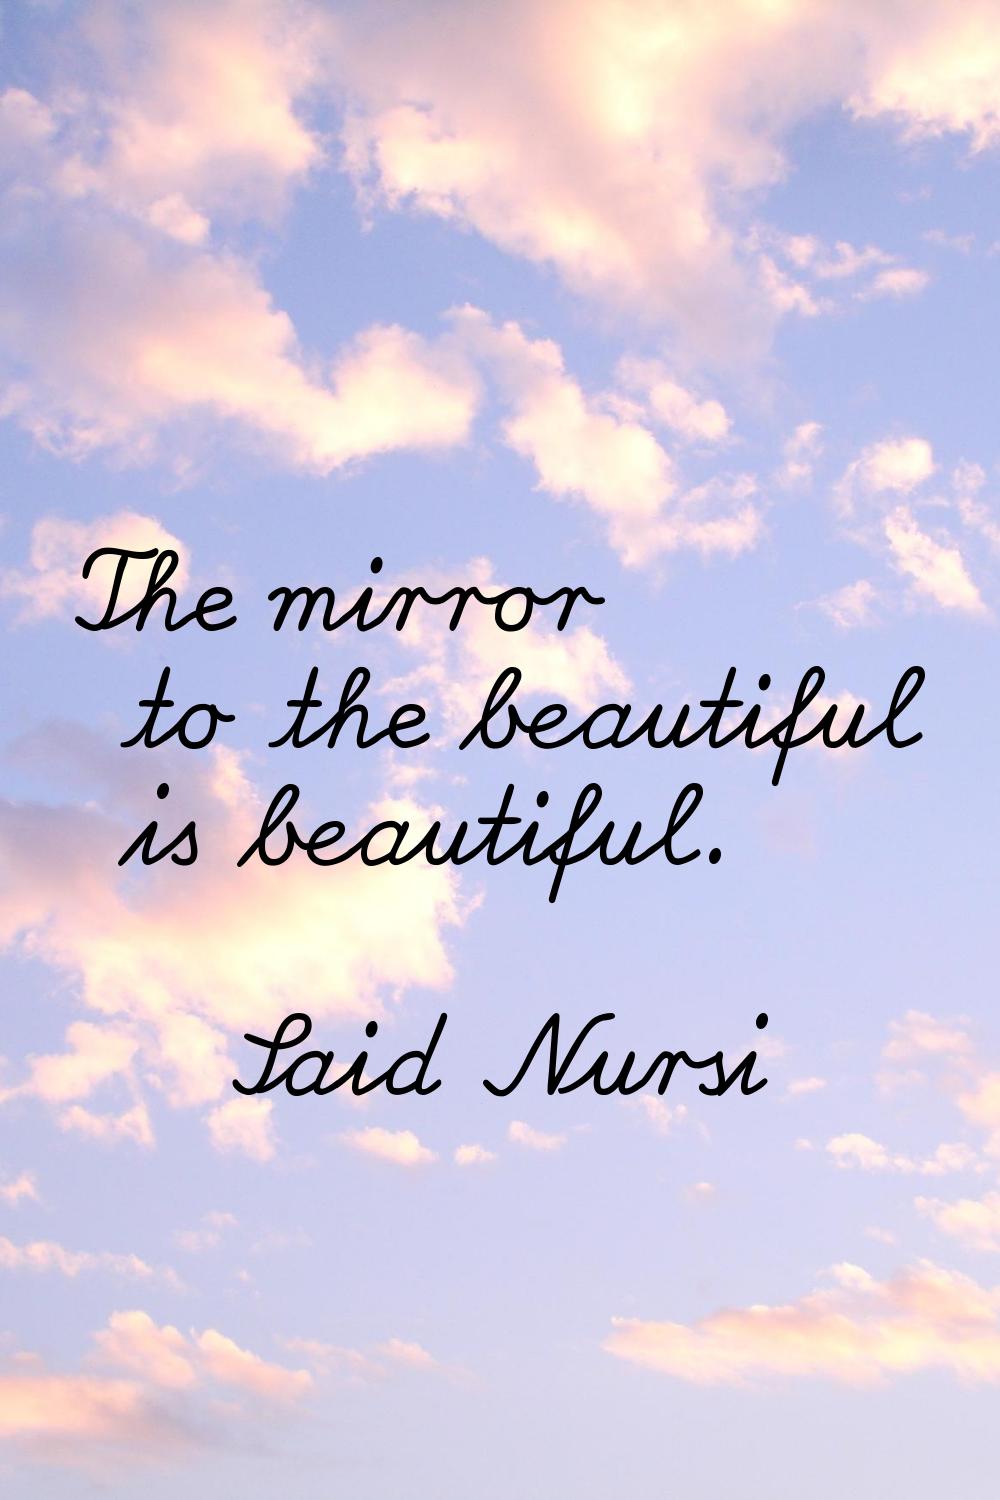 The mirror to the beautiful is beautiful.